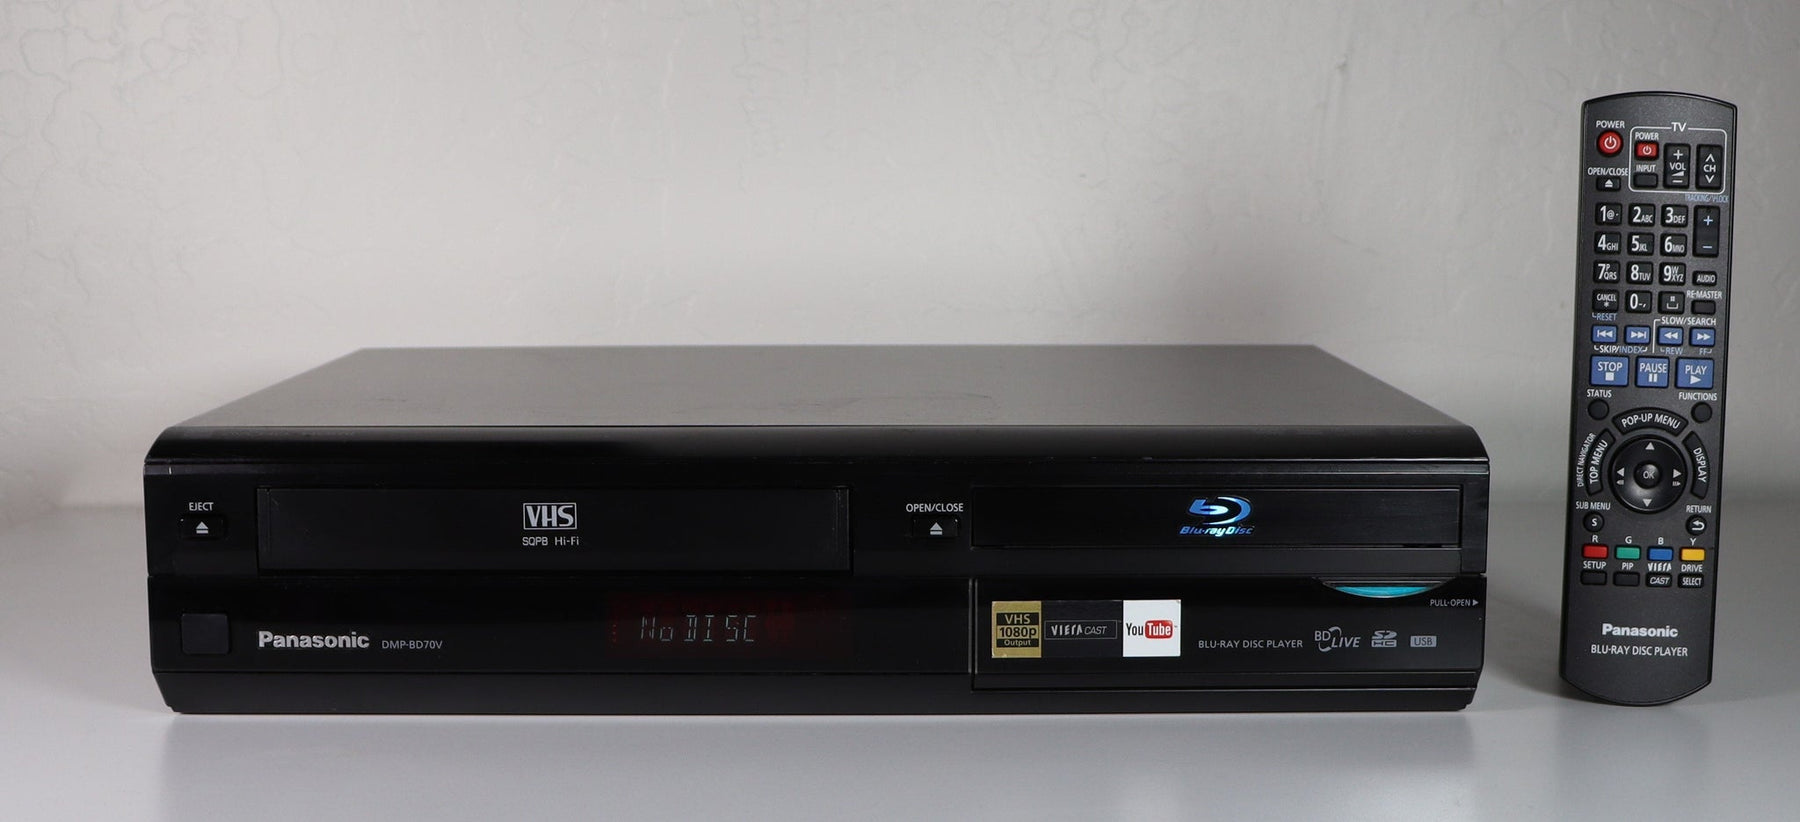 A Blu-Ray Player and a VHS Player in One Device! The rare Panasonic DMP-BD70V Blu-Ray VHS Combo